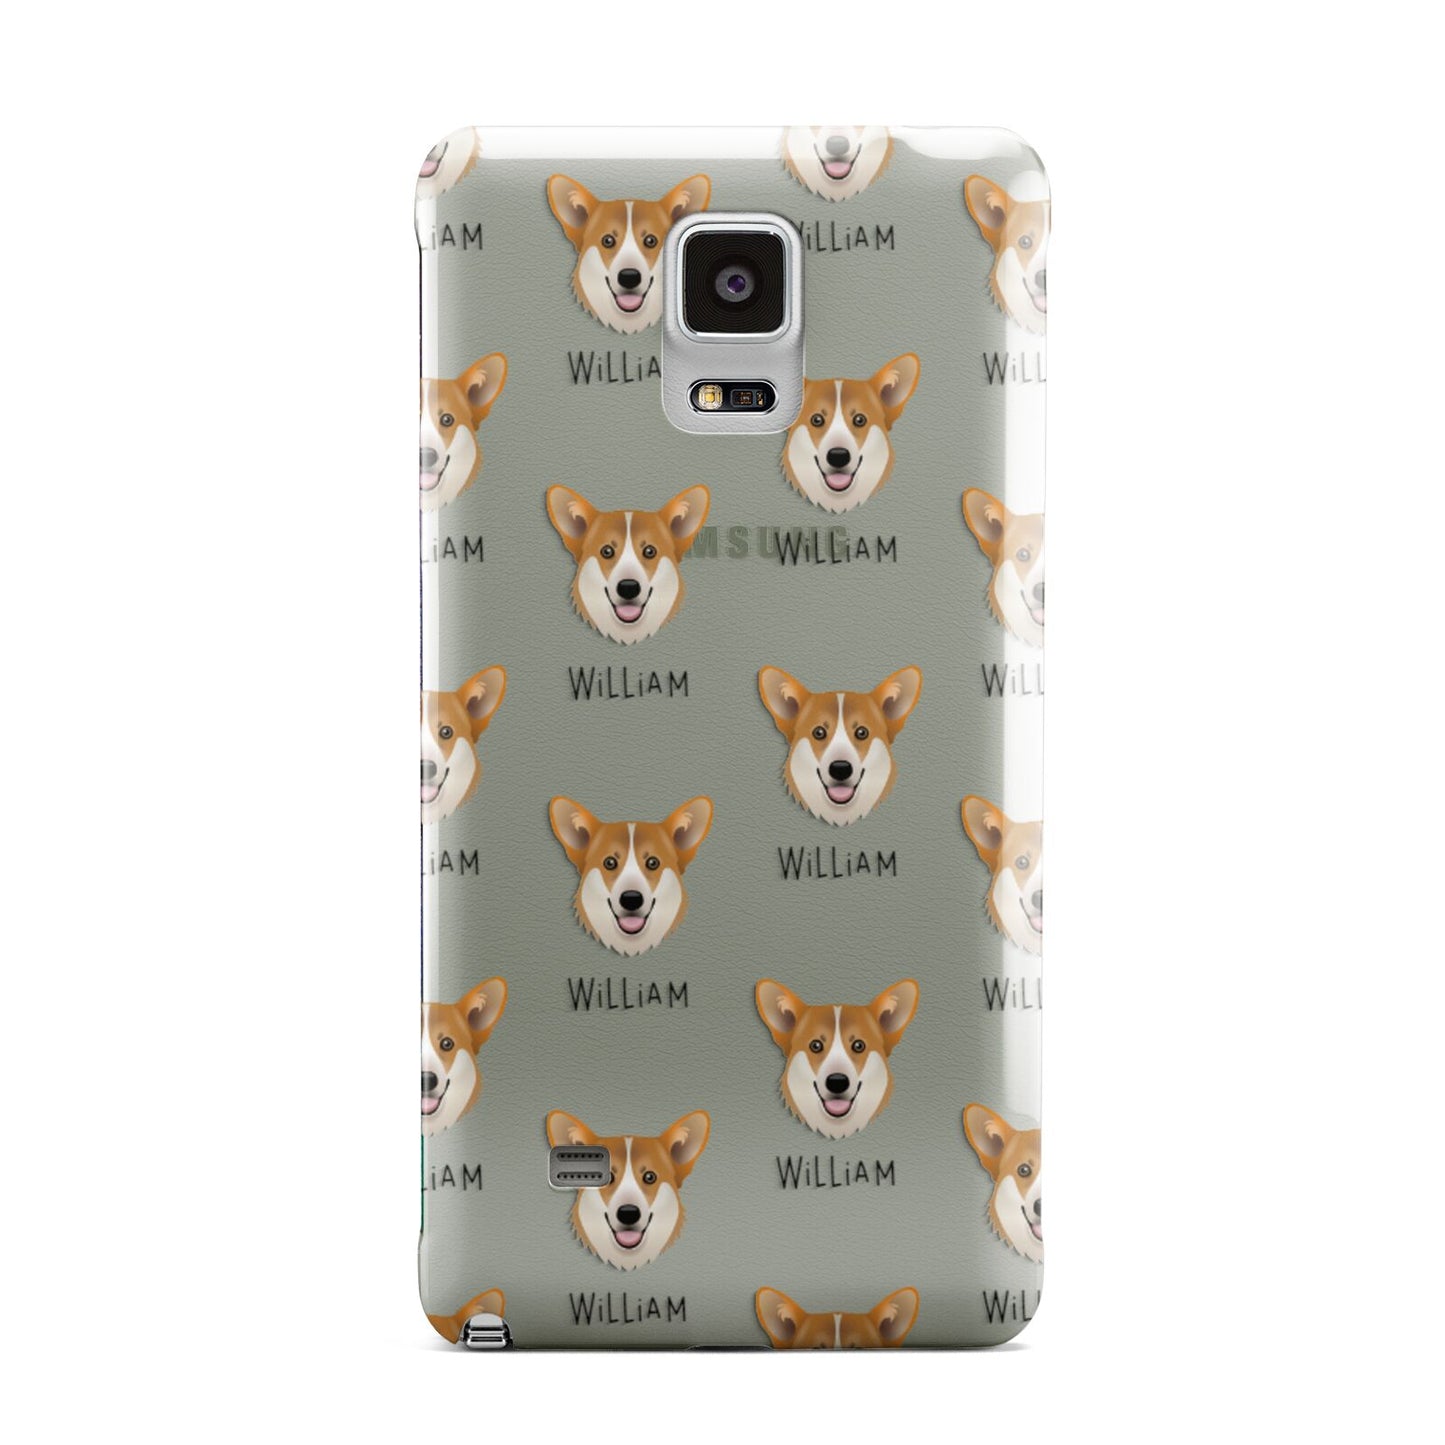 Pembroke Welsh Corgi Icon with Name Samsung Galaxy Note 4 Case